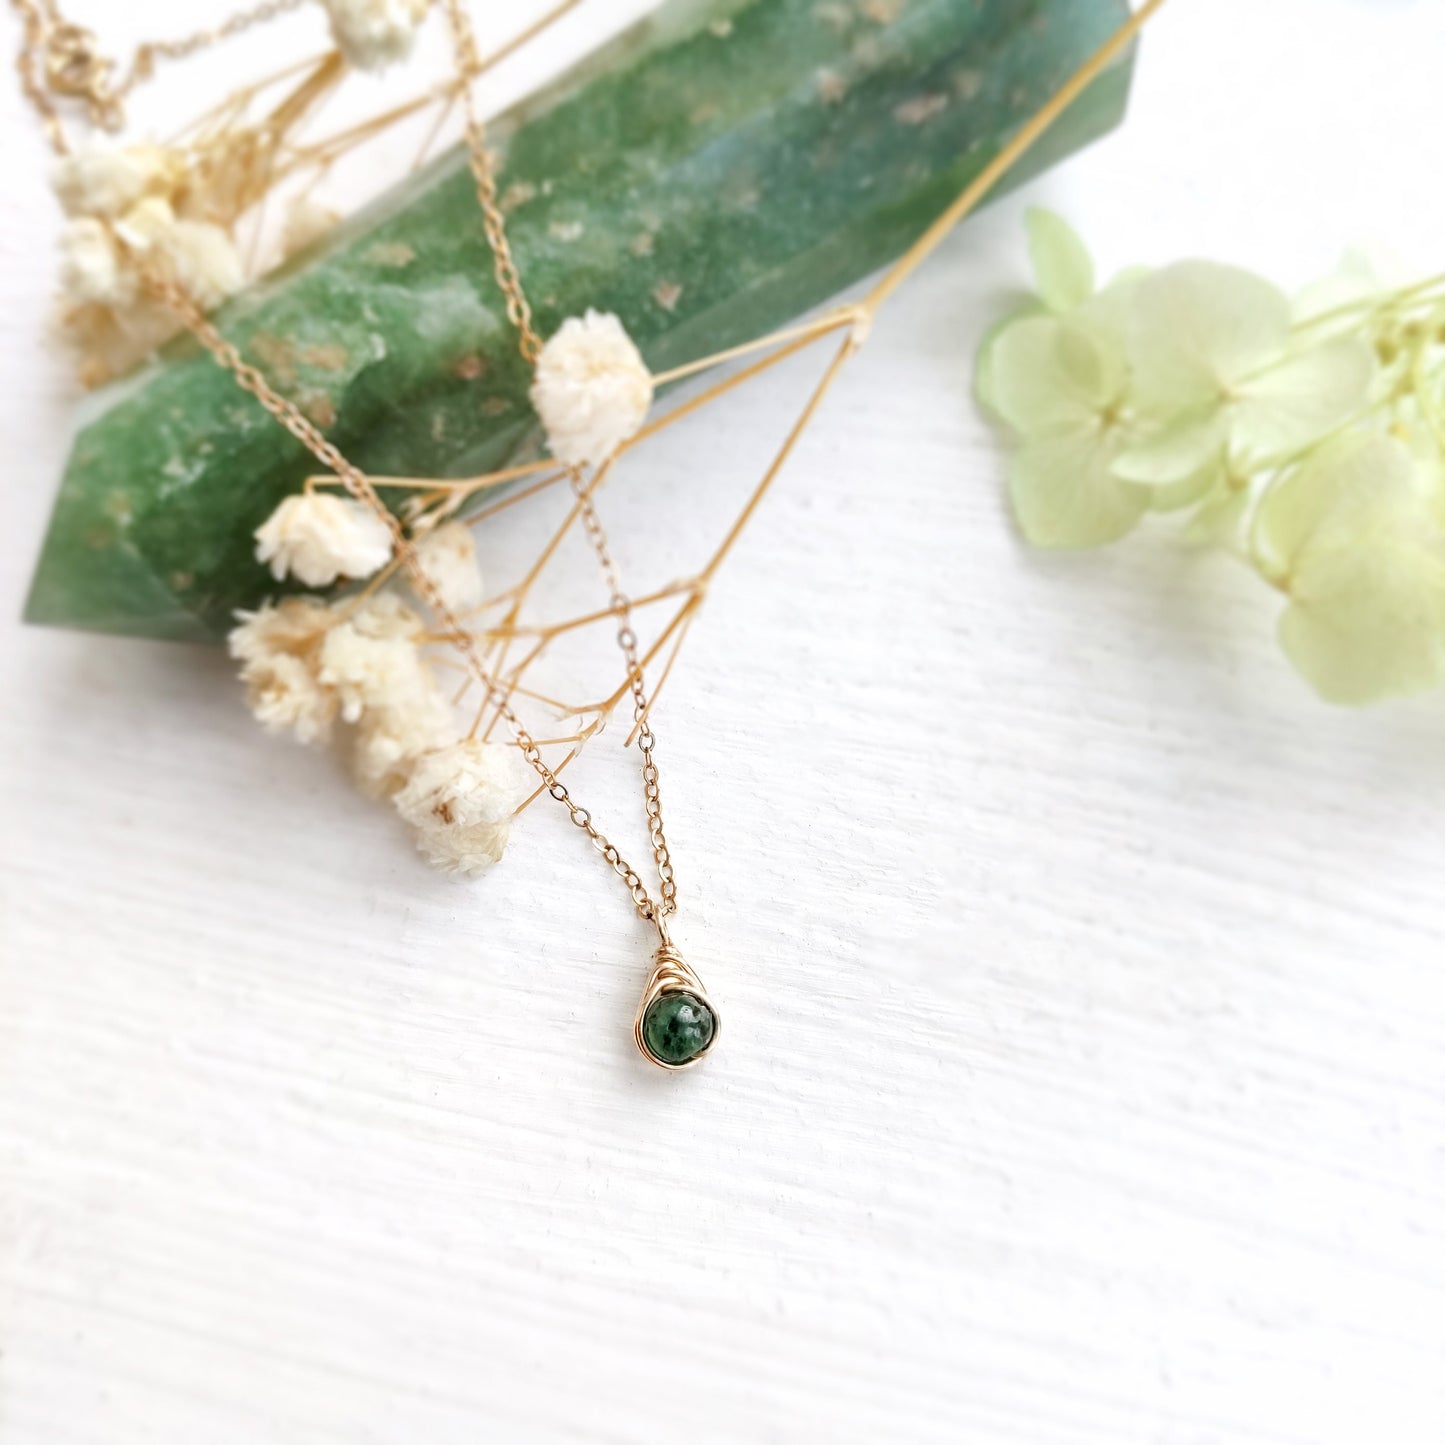 Dainty Emerald Jewelry Set with Earrings and Necklace